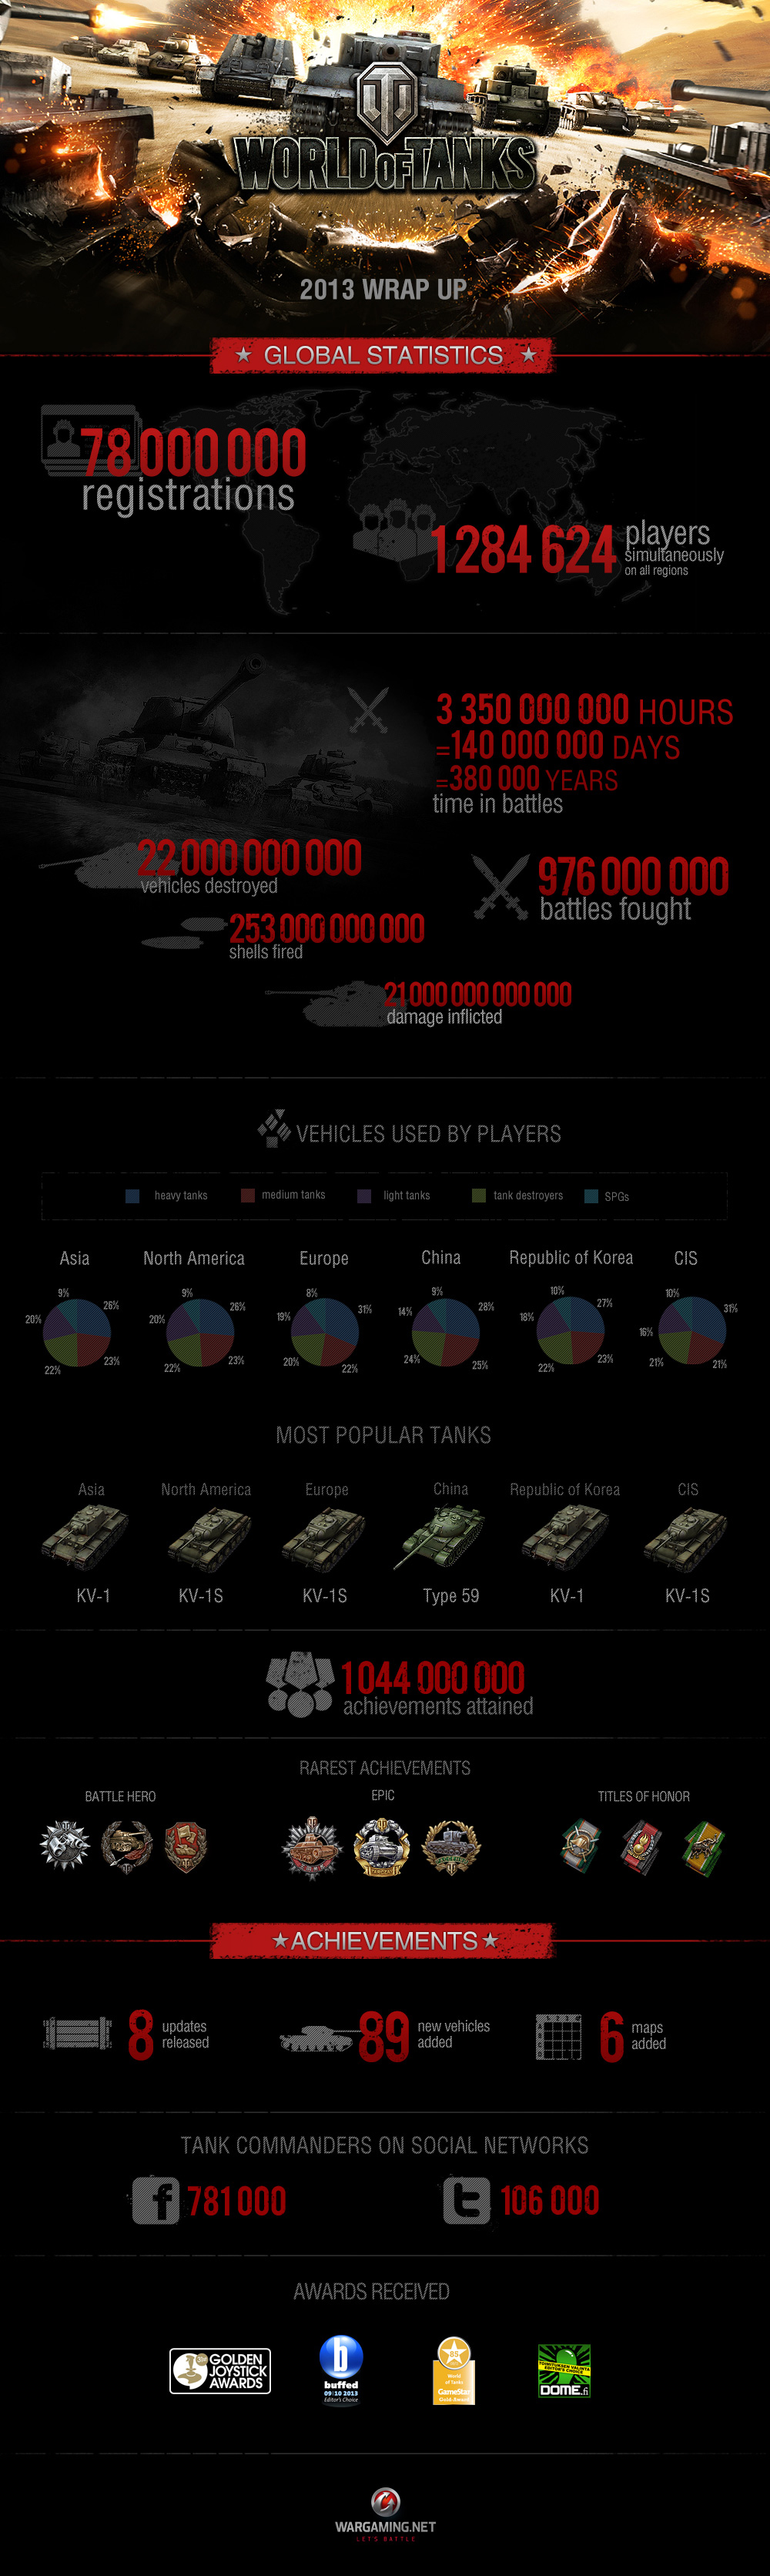 WoT_Infographic